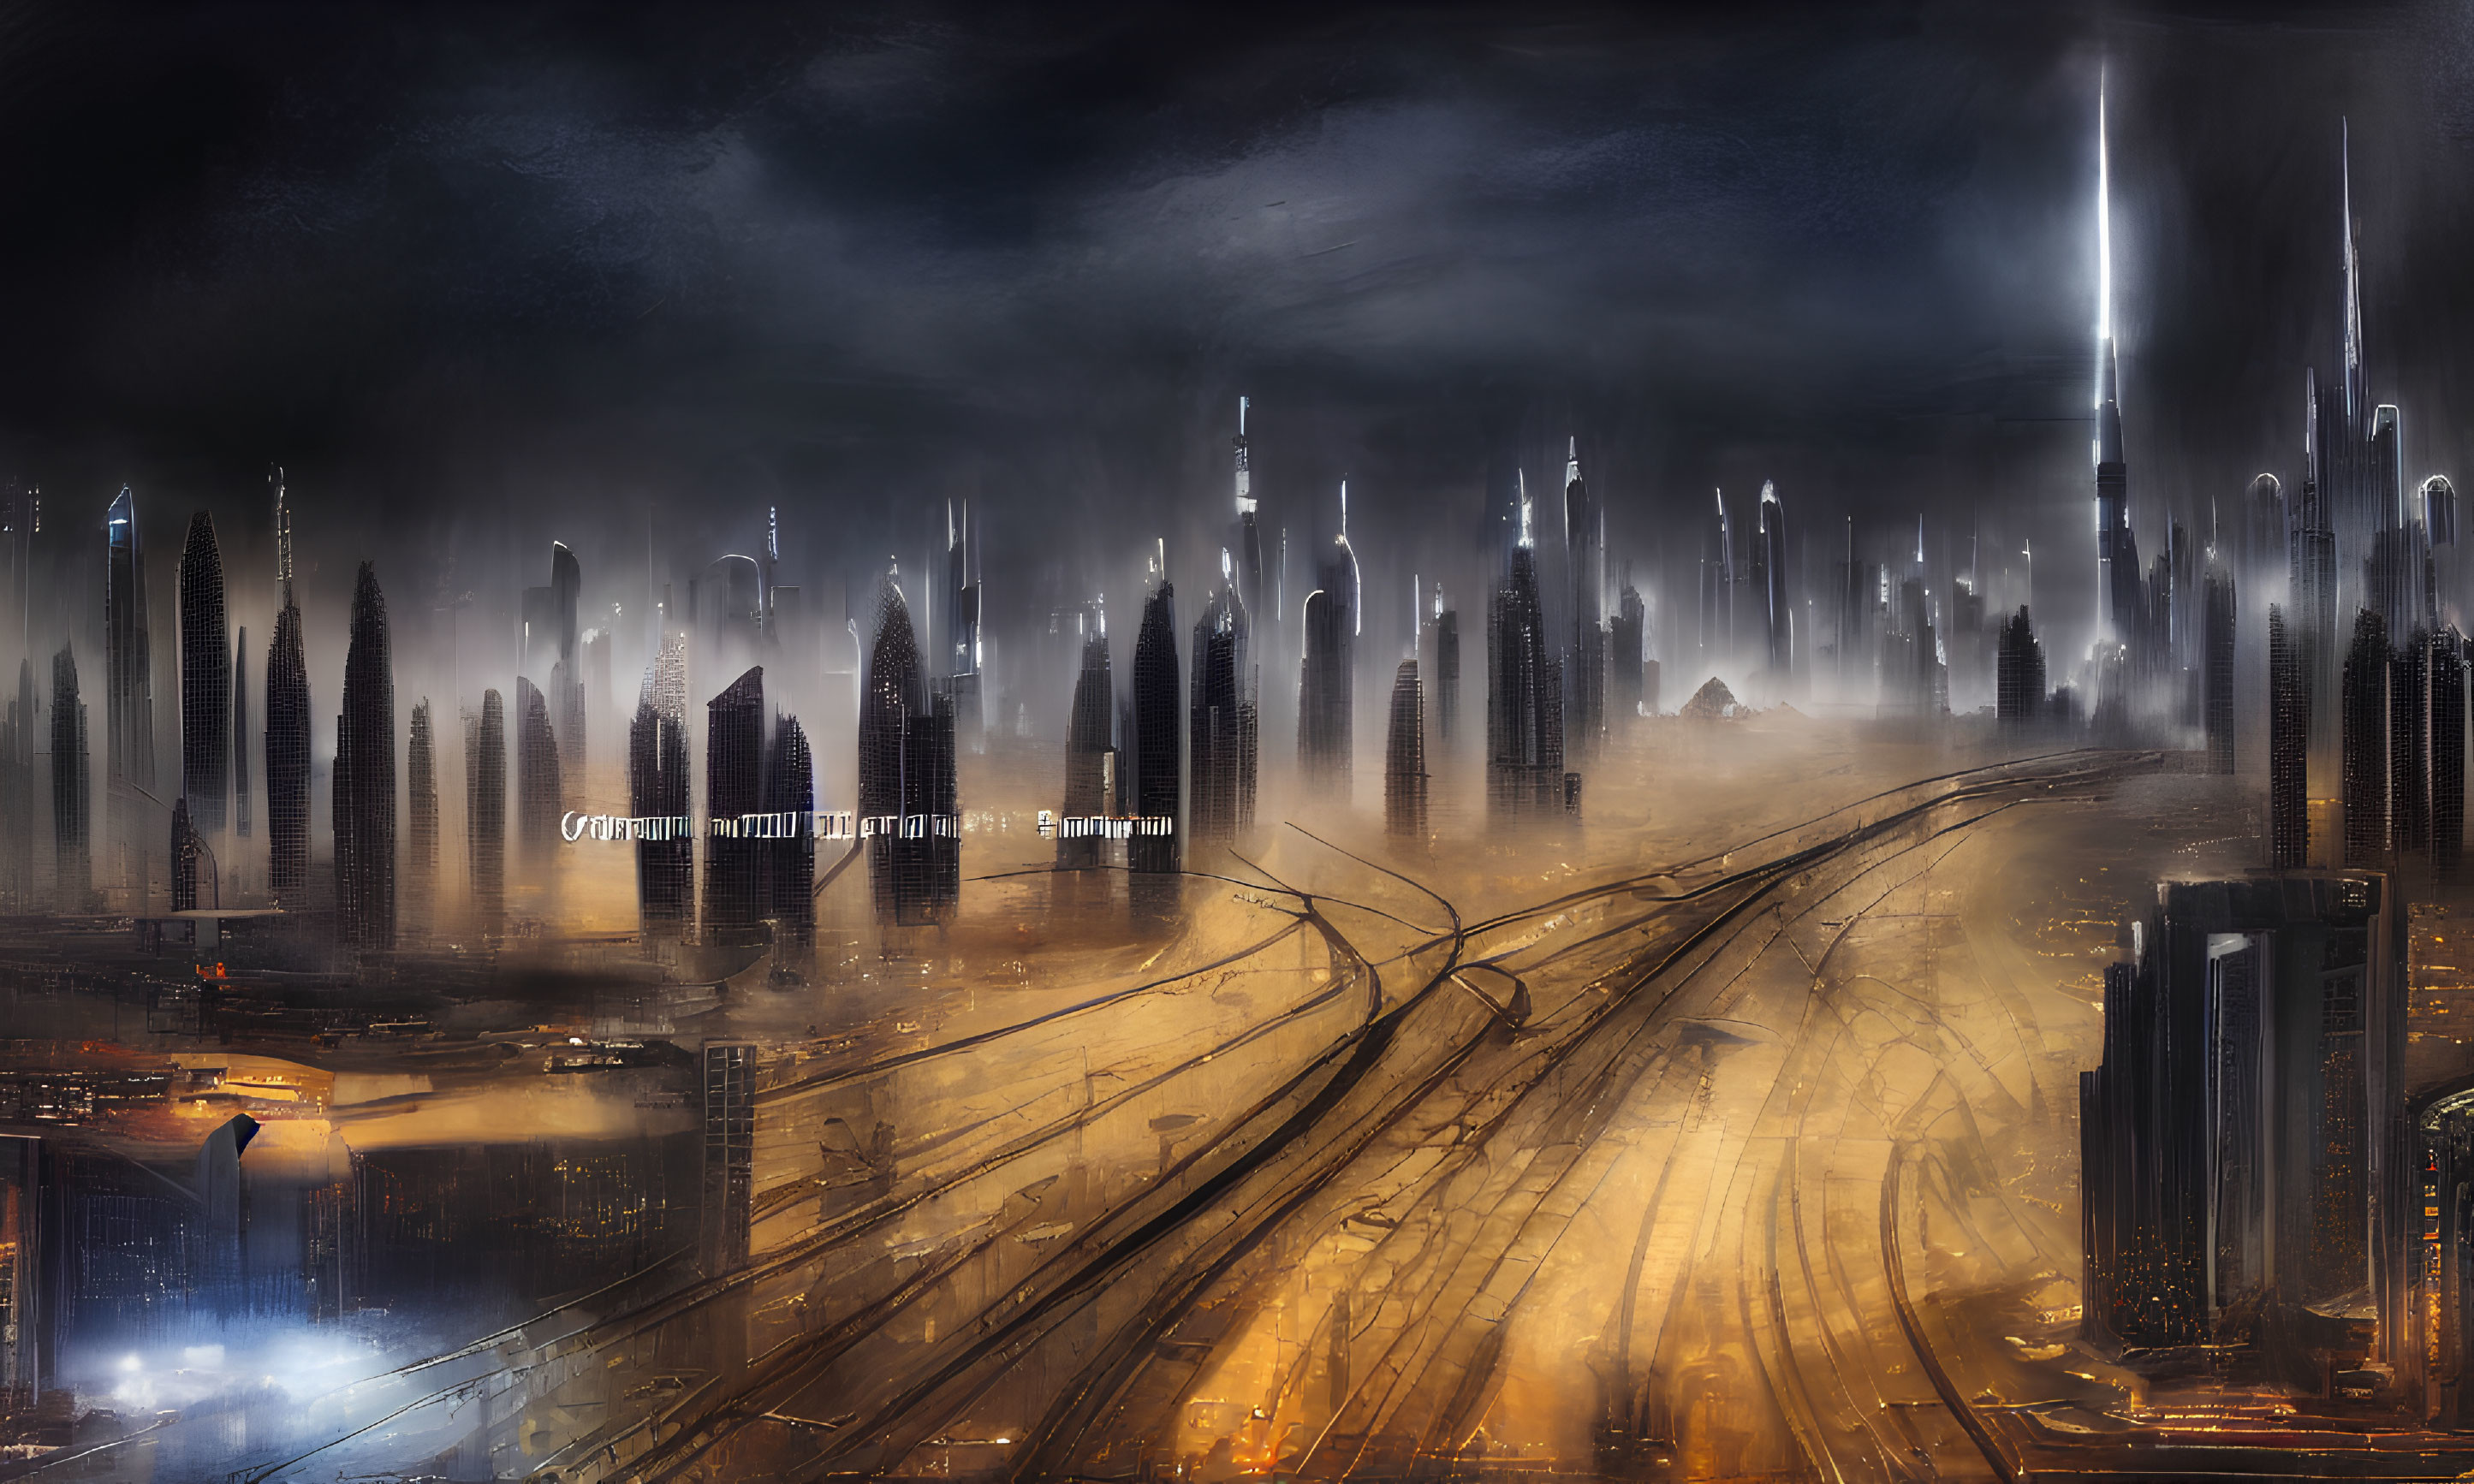 Futuristic night cityscape with stormy sky, towering skyscrapers, roads, and dyst